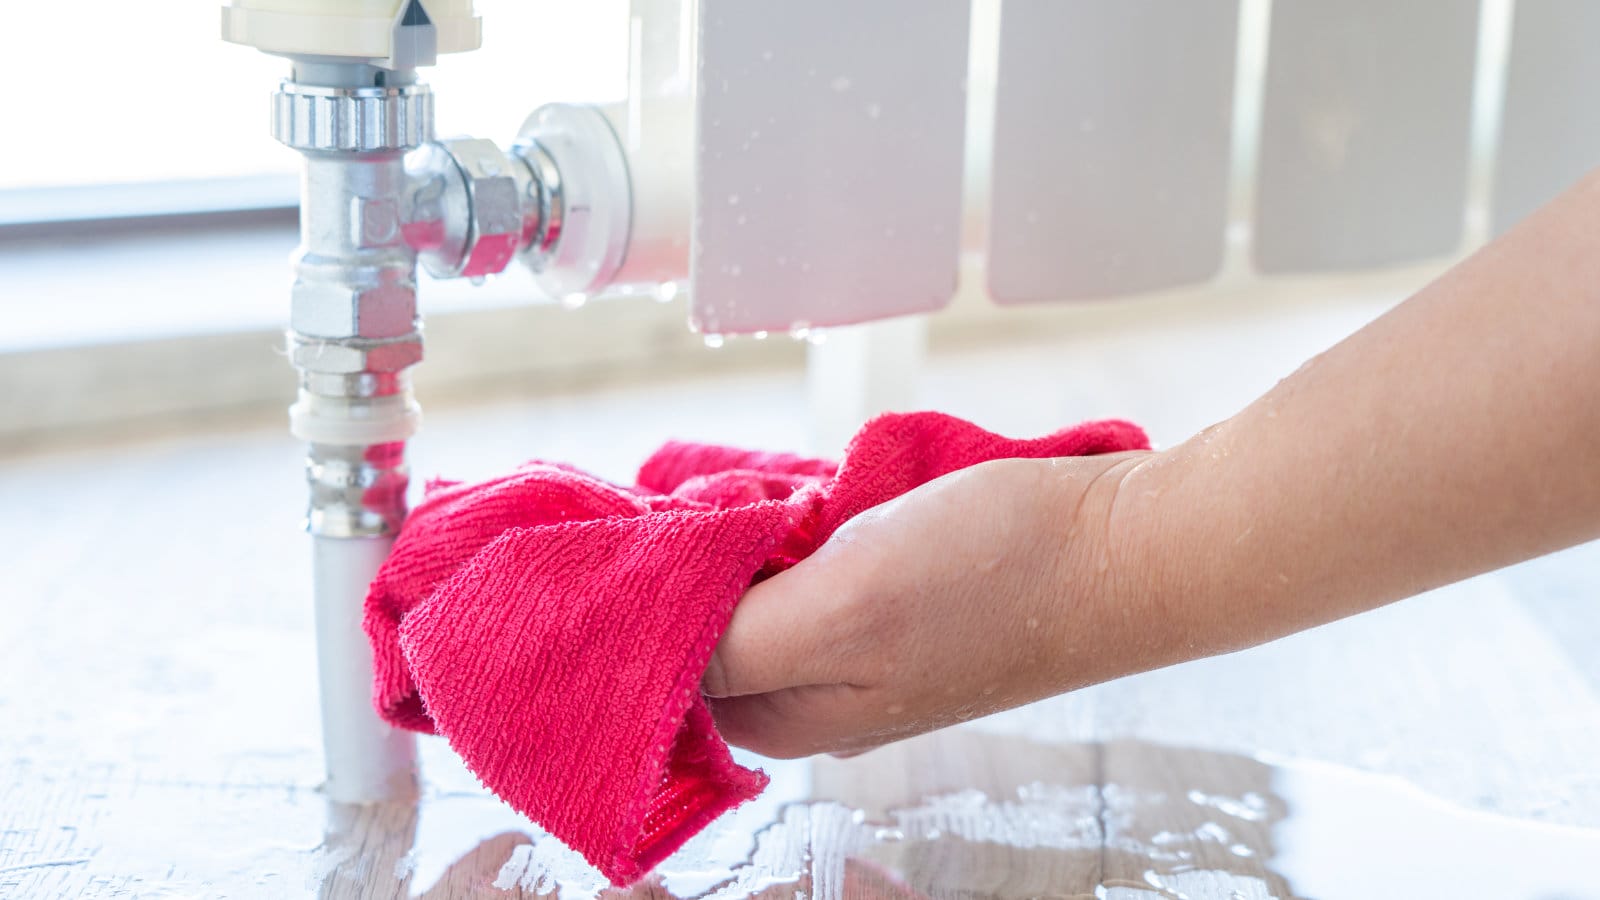 A person's hand using a bright pink cloth to mop up the water around a leaky radiator valve, symbolizing common home plumbing issues that might be covered by insurance.